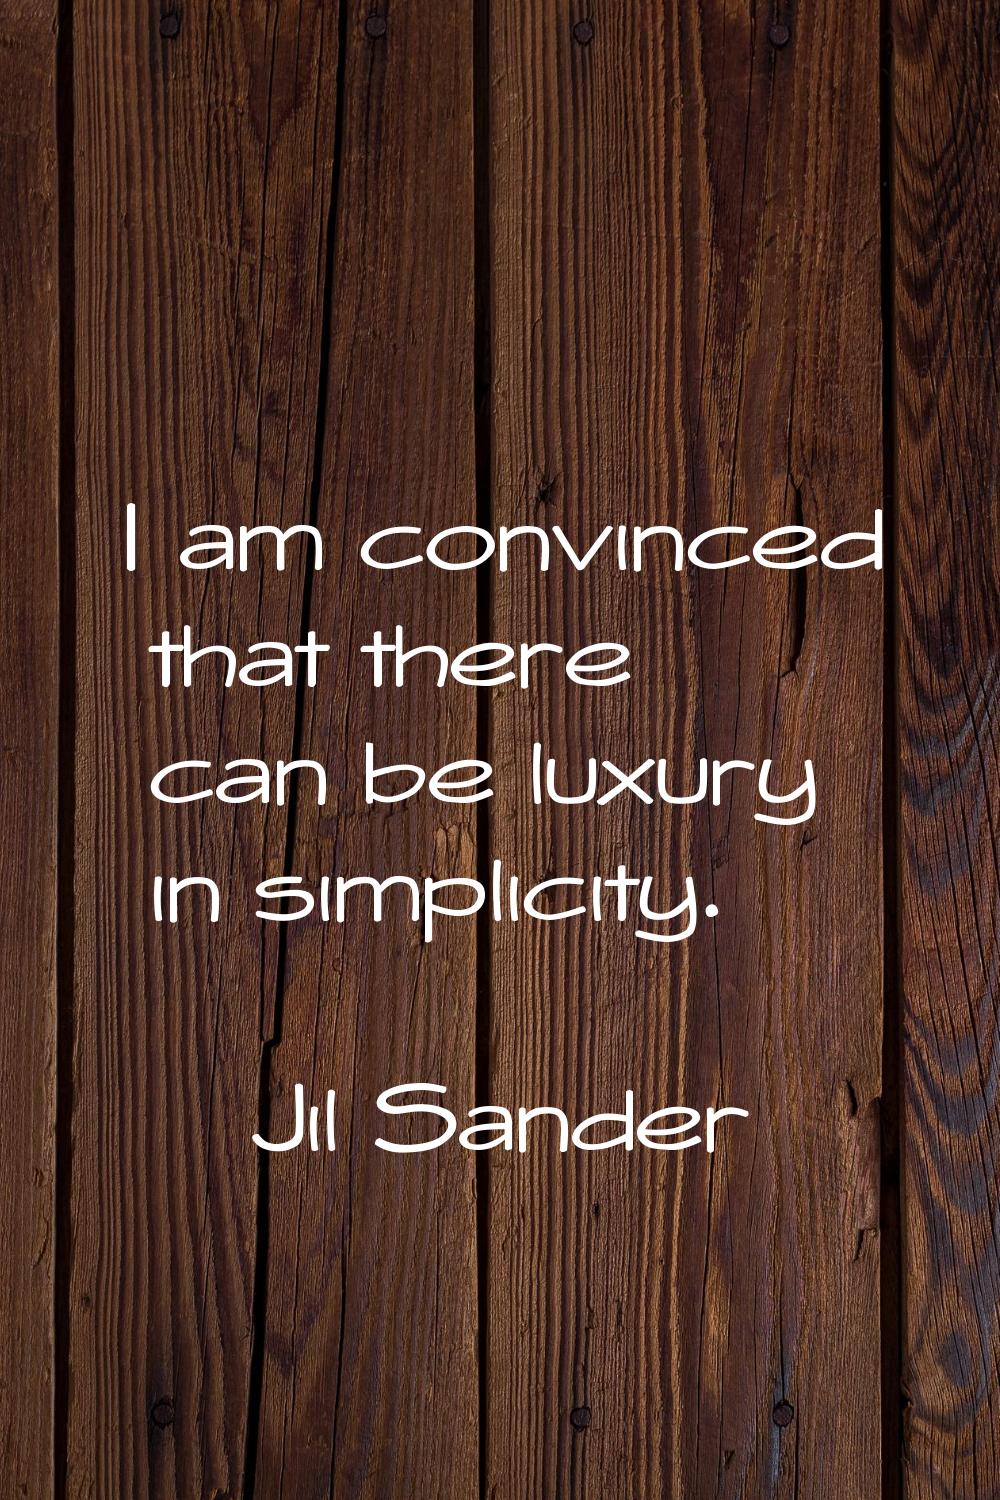 I am convinced that there can be luxury in simplicity.